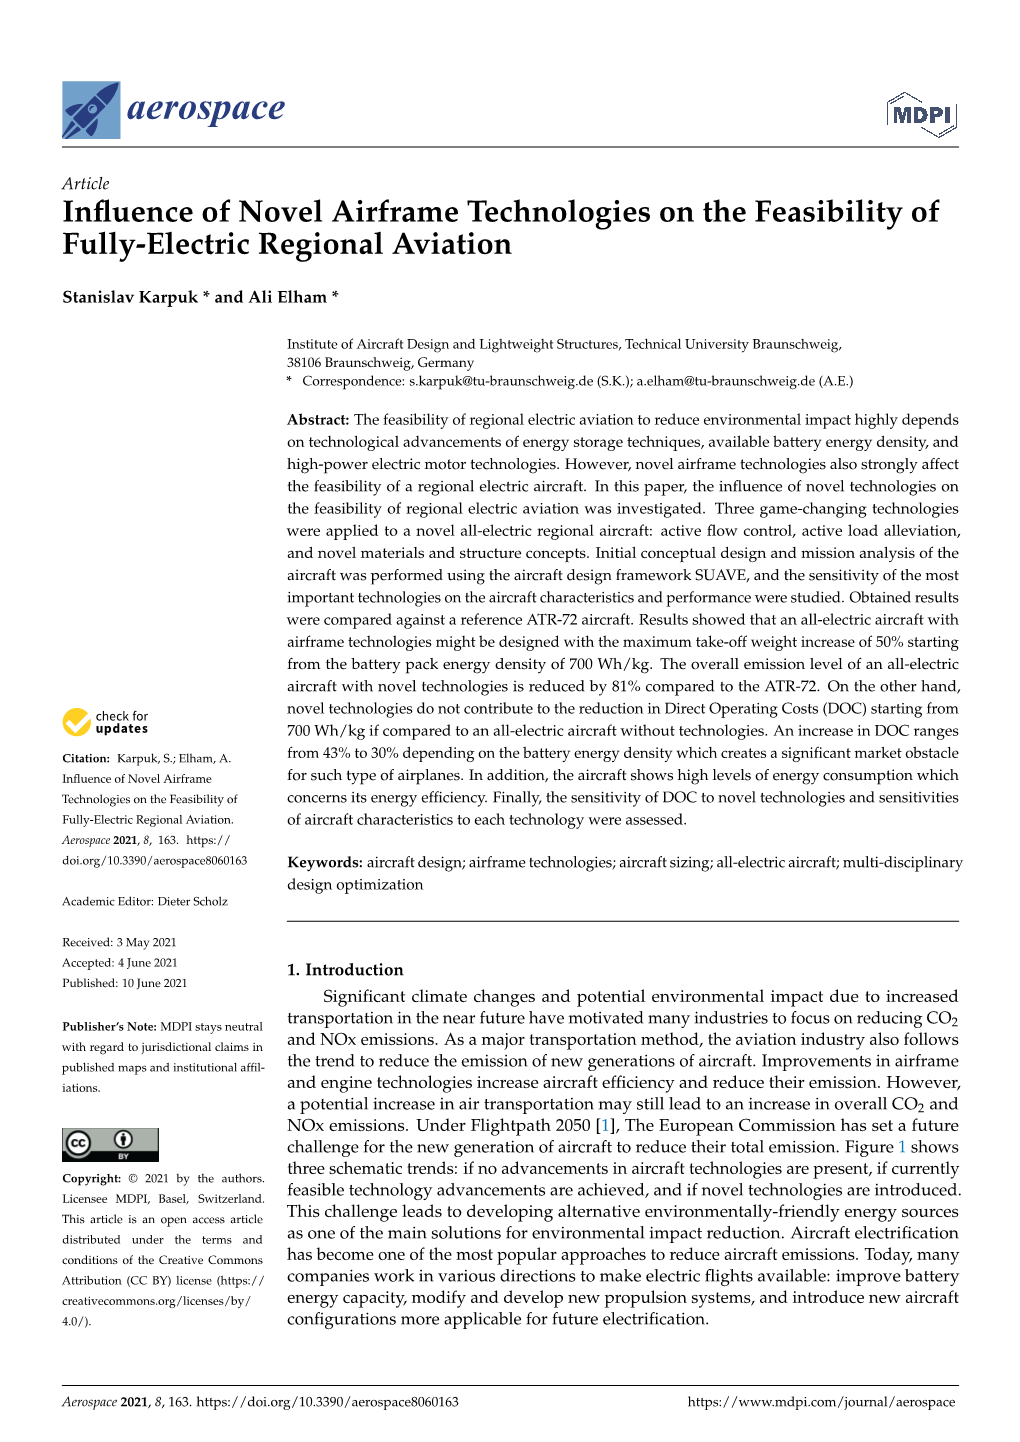 Influence of Novel Airframe Technologies on the Feasibility of Fully-Electric Regional Aviation